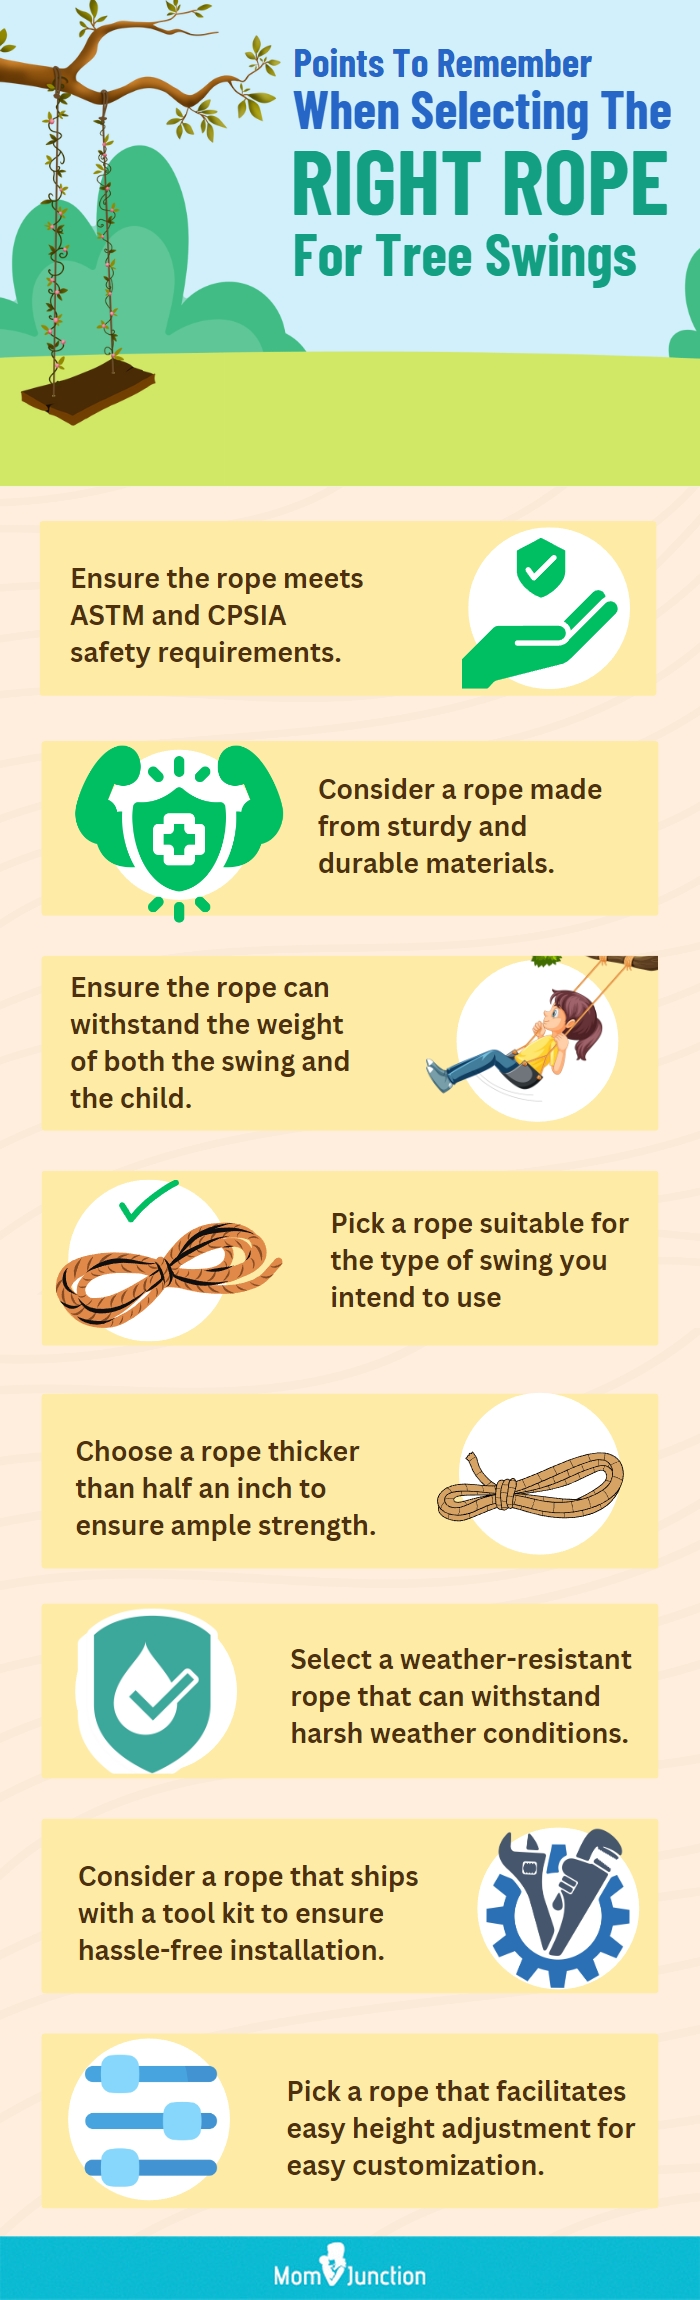 Points To Remember When Selecting The Right Rope For Tree Swings (infographic)